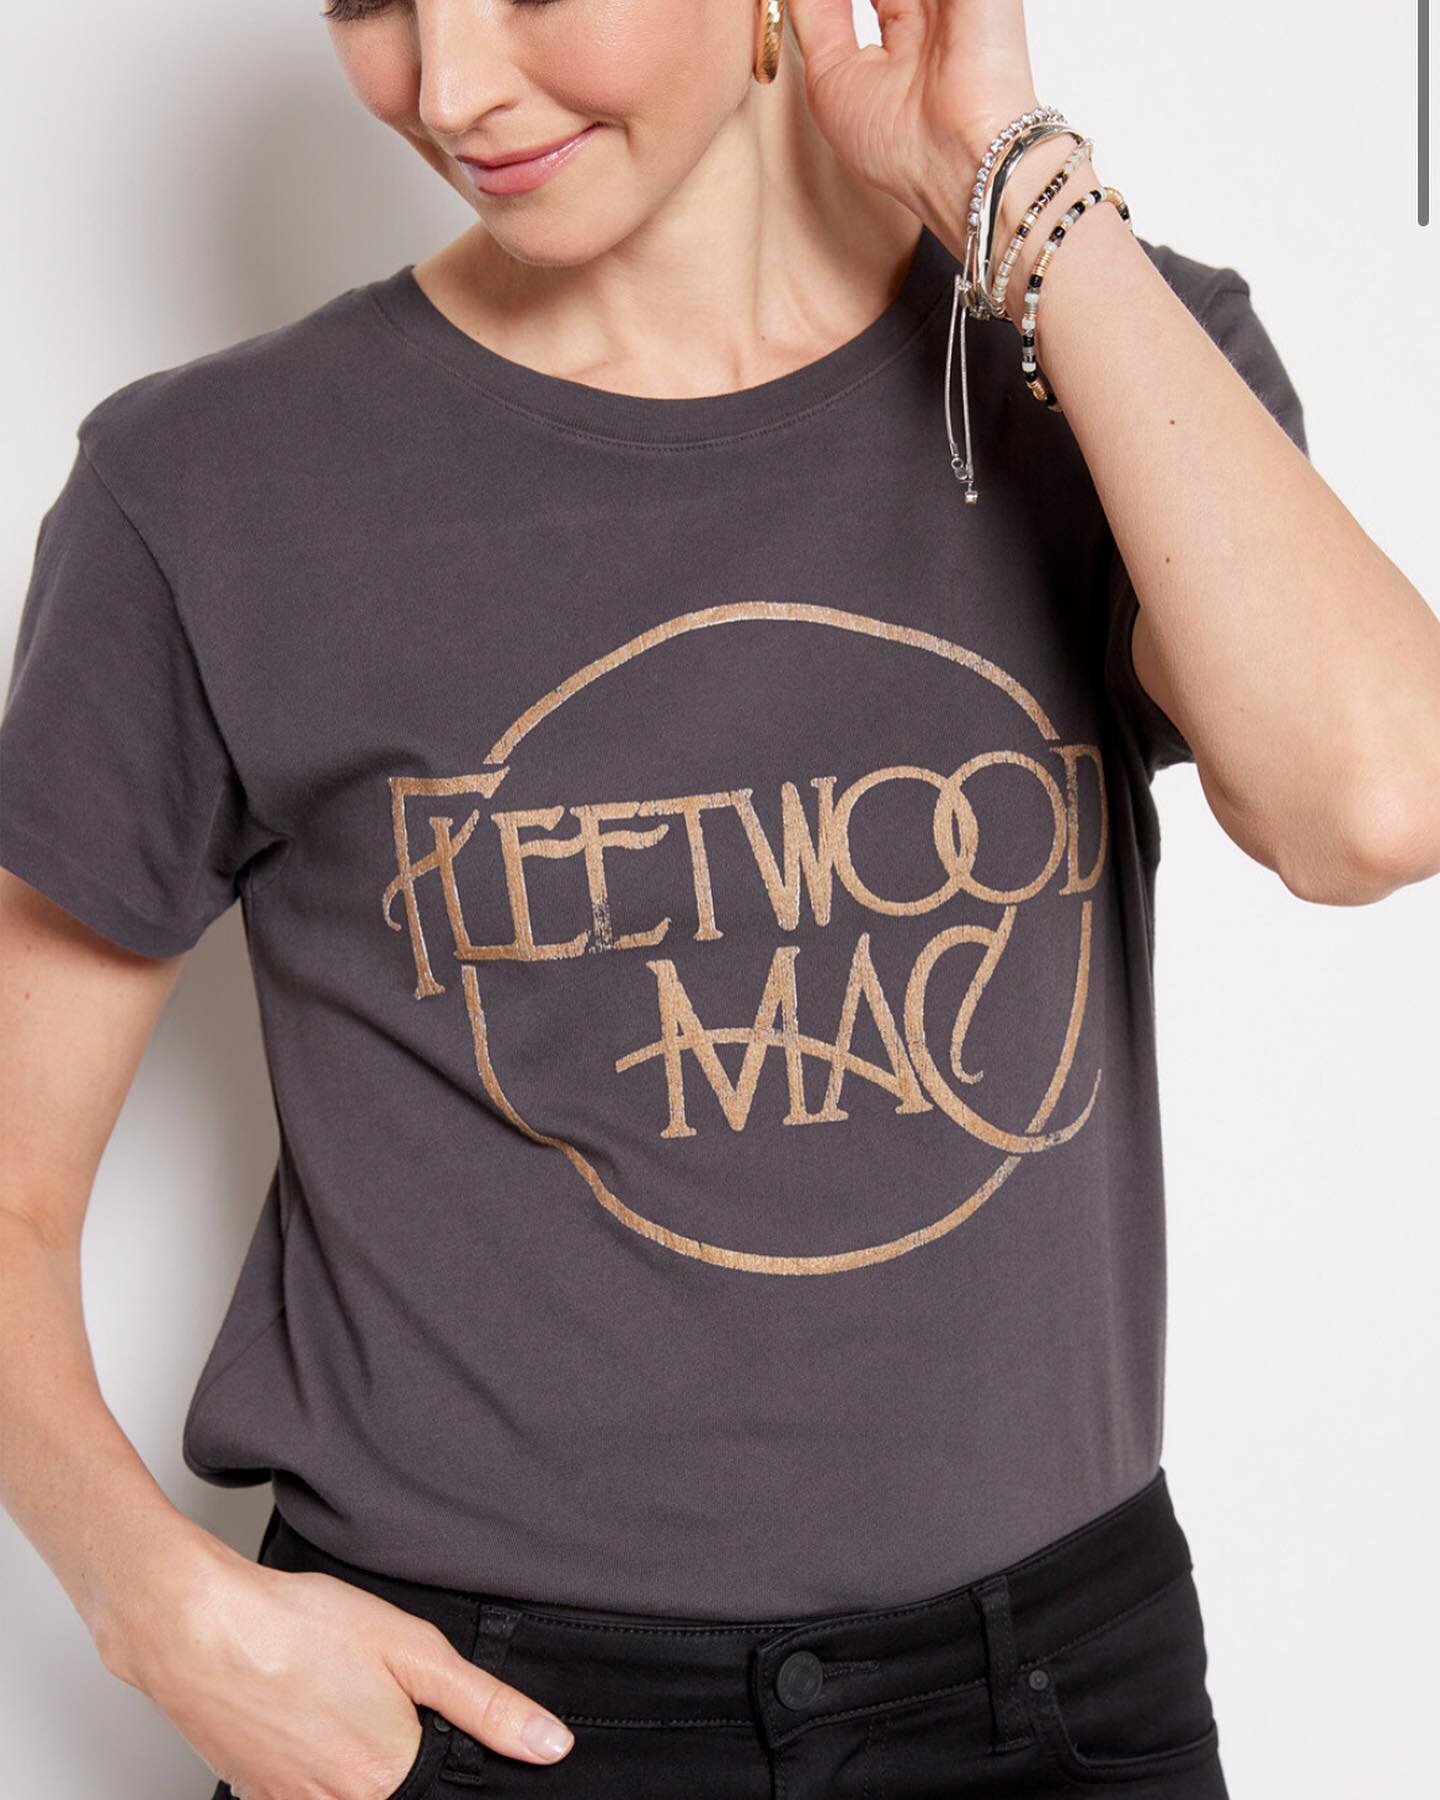 What a best seller looks like 💫 @evereveofficial @daydreamerlaclothing #bandtee #FleetwoodMac #foil